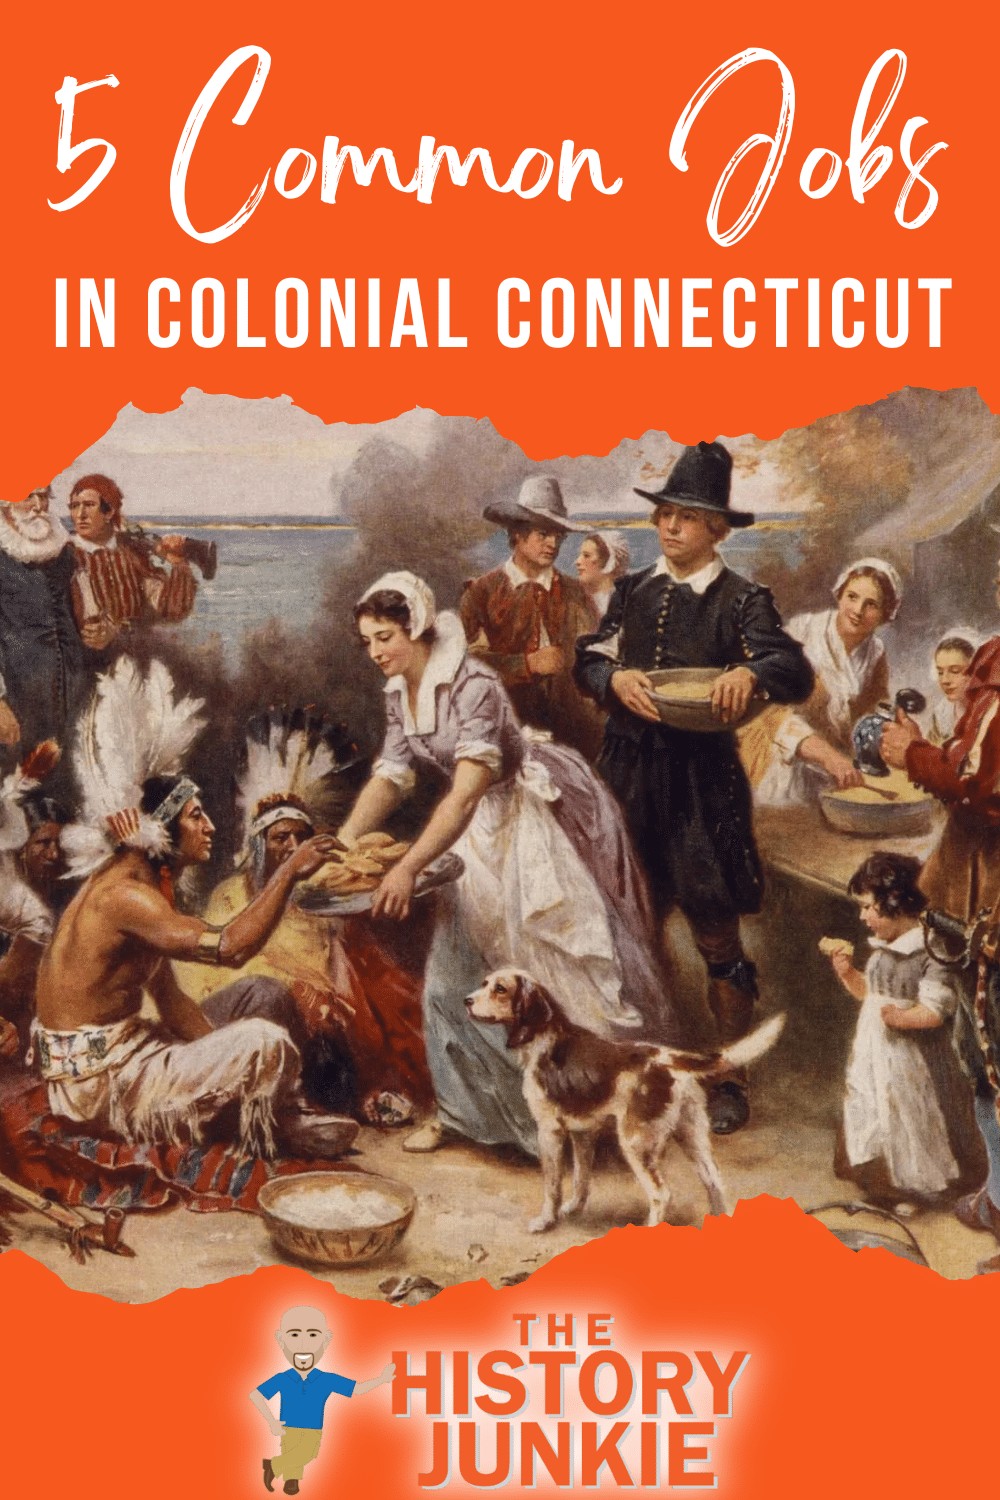 Jobs in Colonial Connecticut